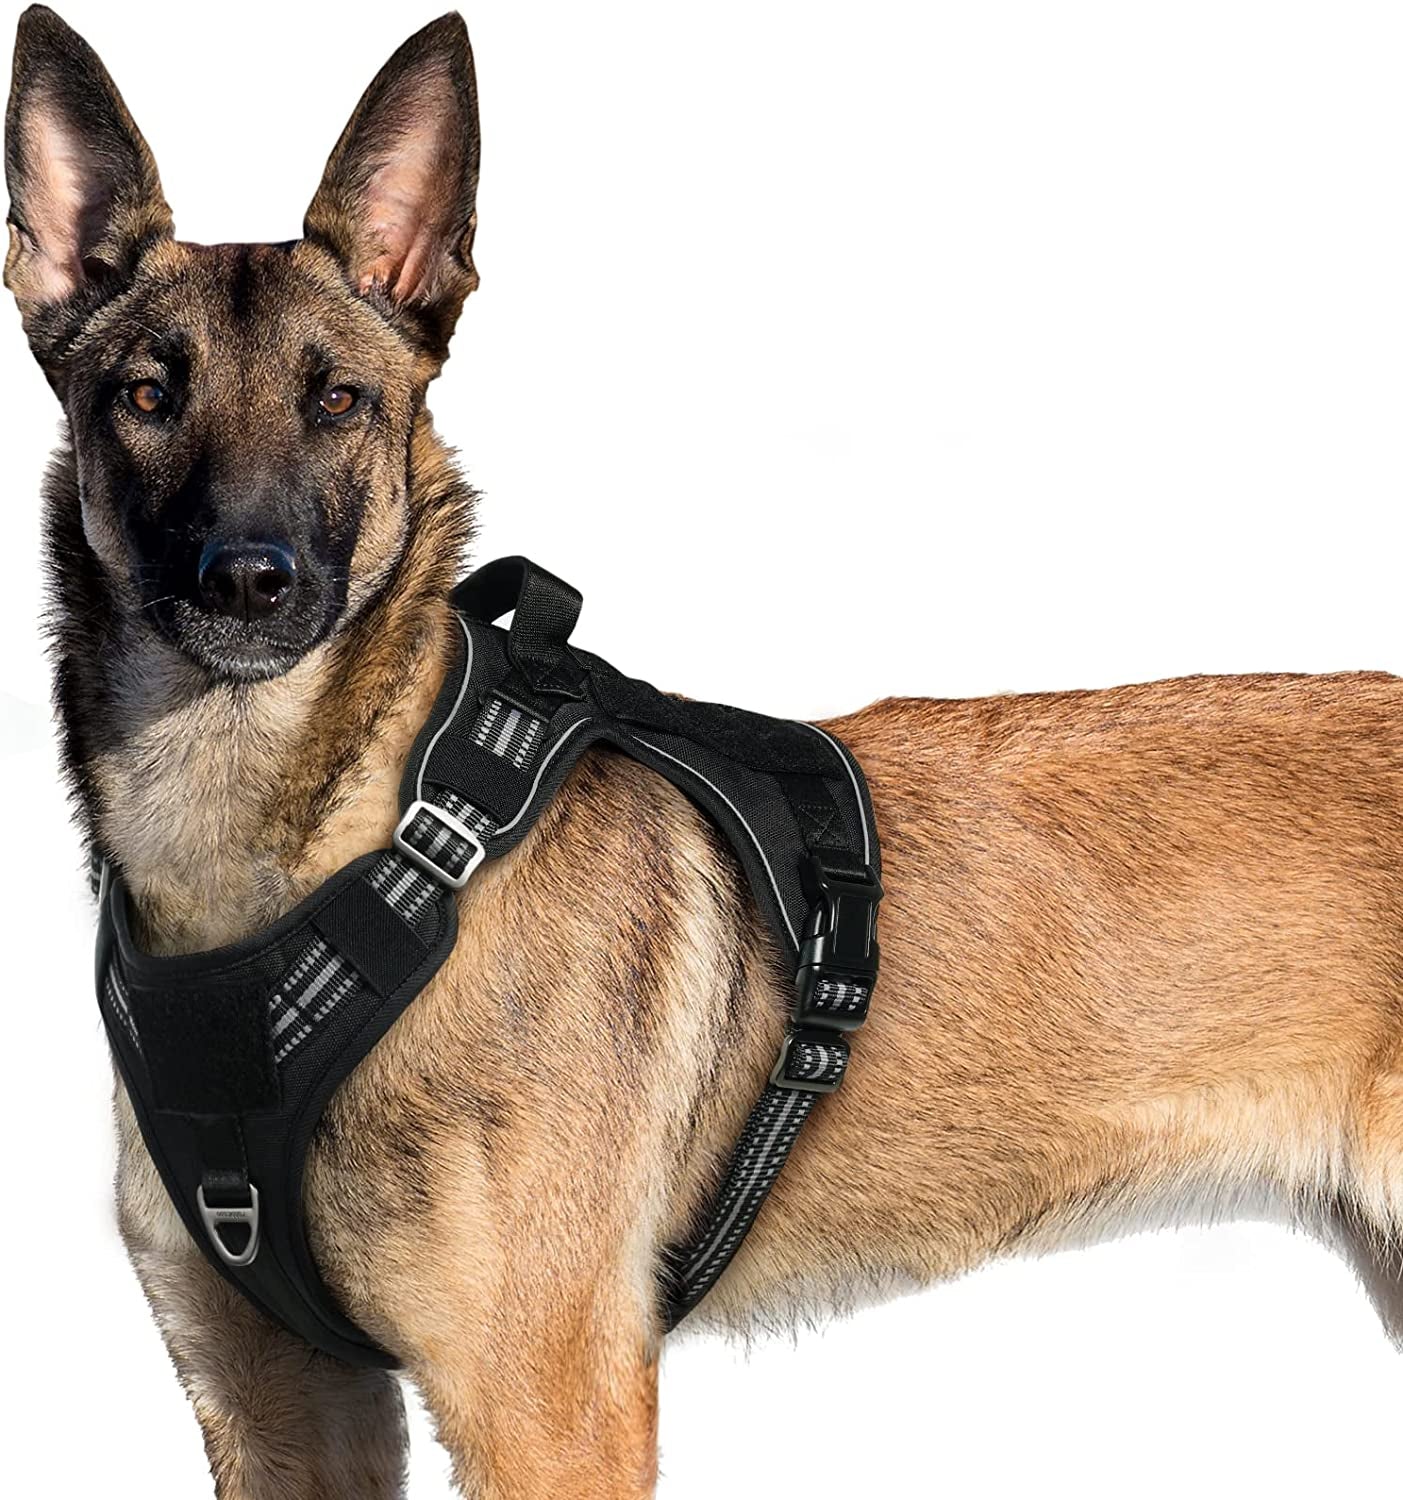 Rabbitgoo Tactical Dog Harness No Pull, Military Dog Vest Harness with Handle & Molle, Easy Control Service Dog Harness for Large Dogs Training Walking, Adjustable Reflective Pet Harness, Black, L Animals & Pet Supplies > Pet Supplies > Dog Supplies > Dog Apparel GLOBEGOU CO.,LTD Black X-Large 